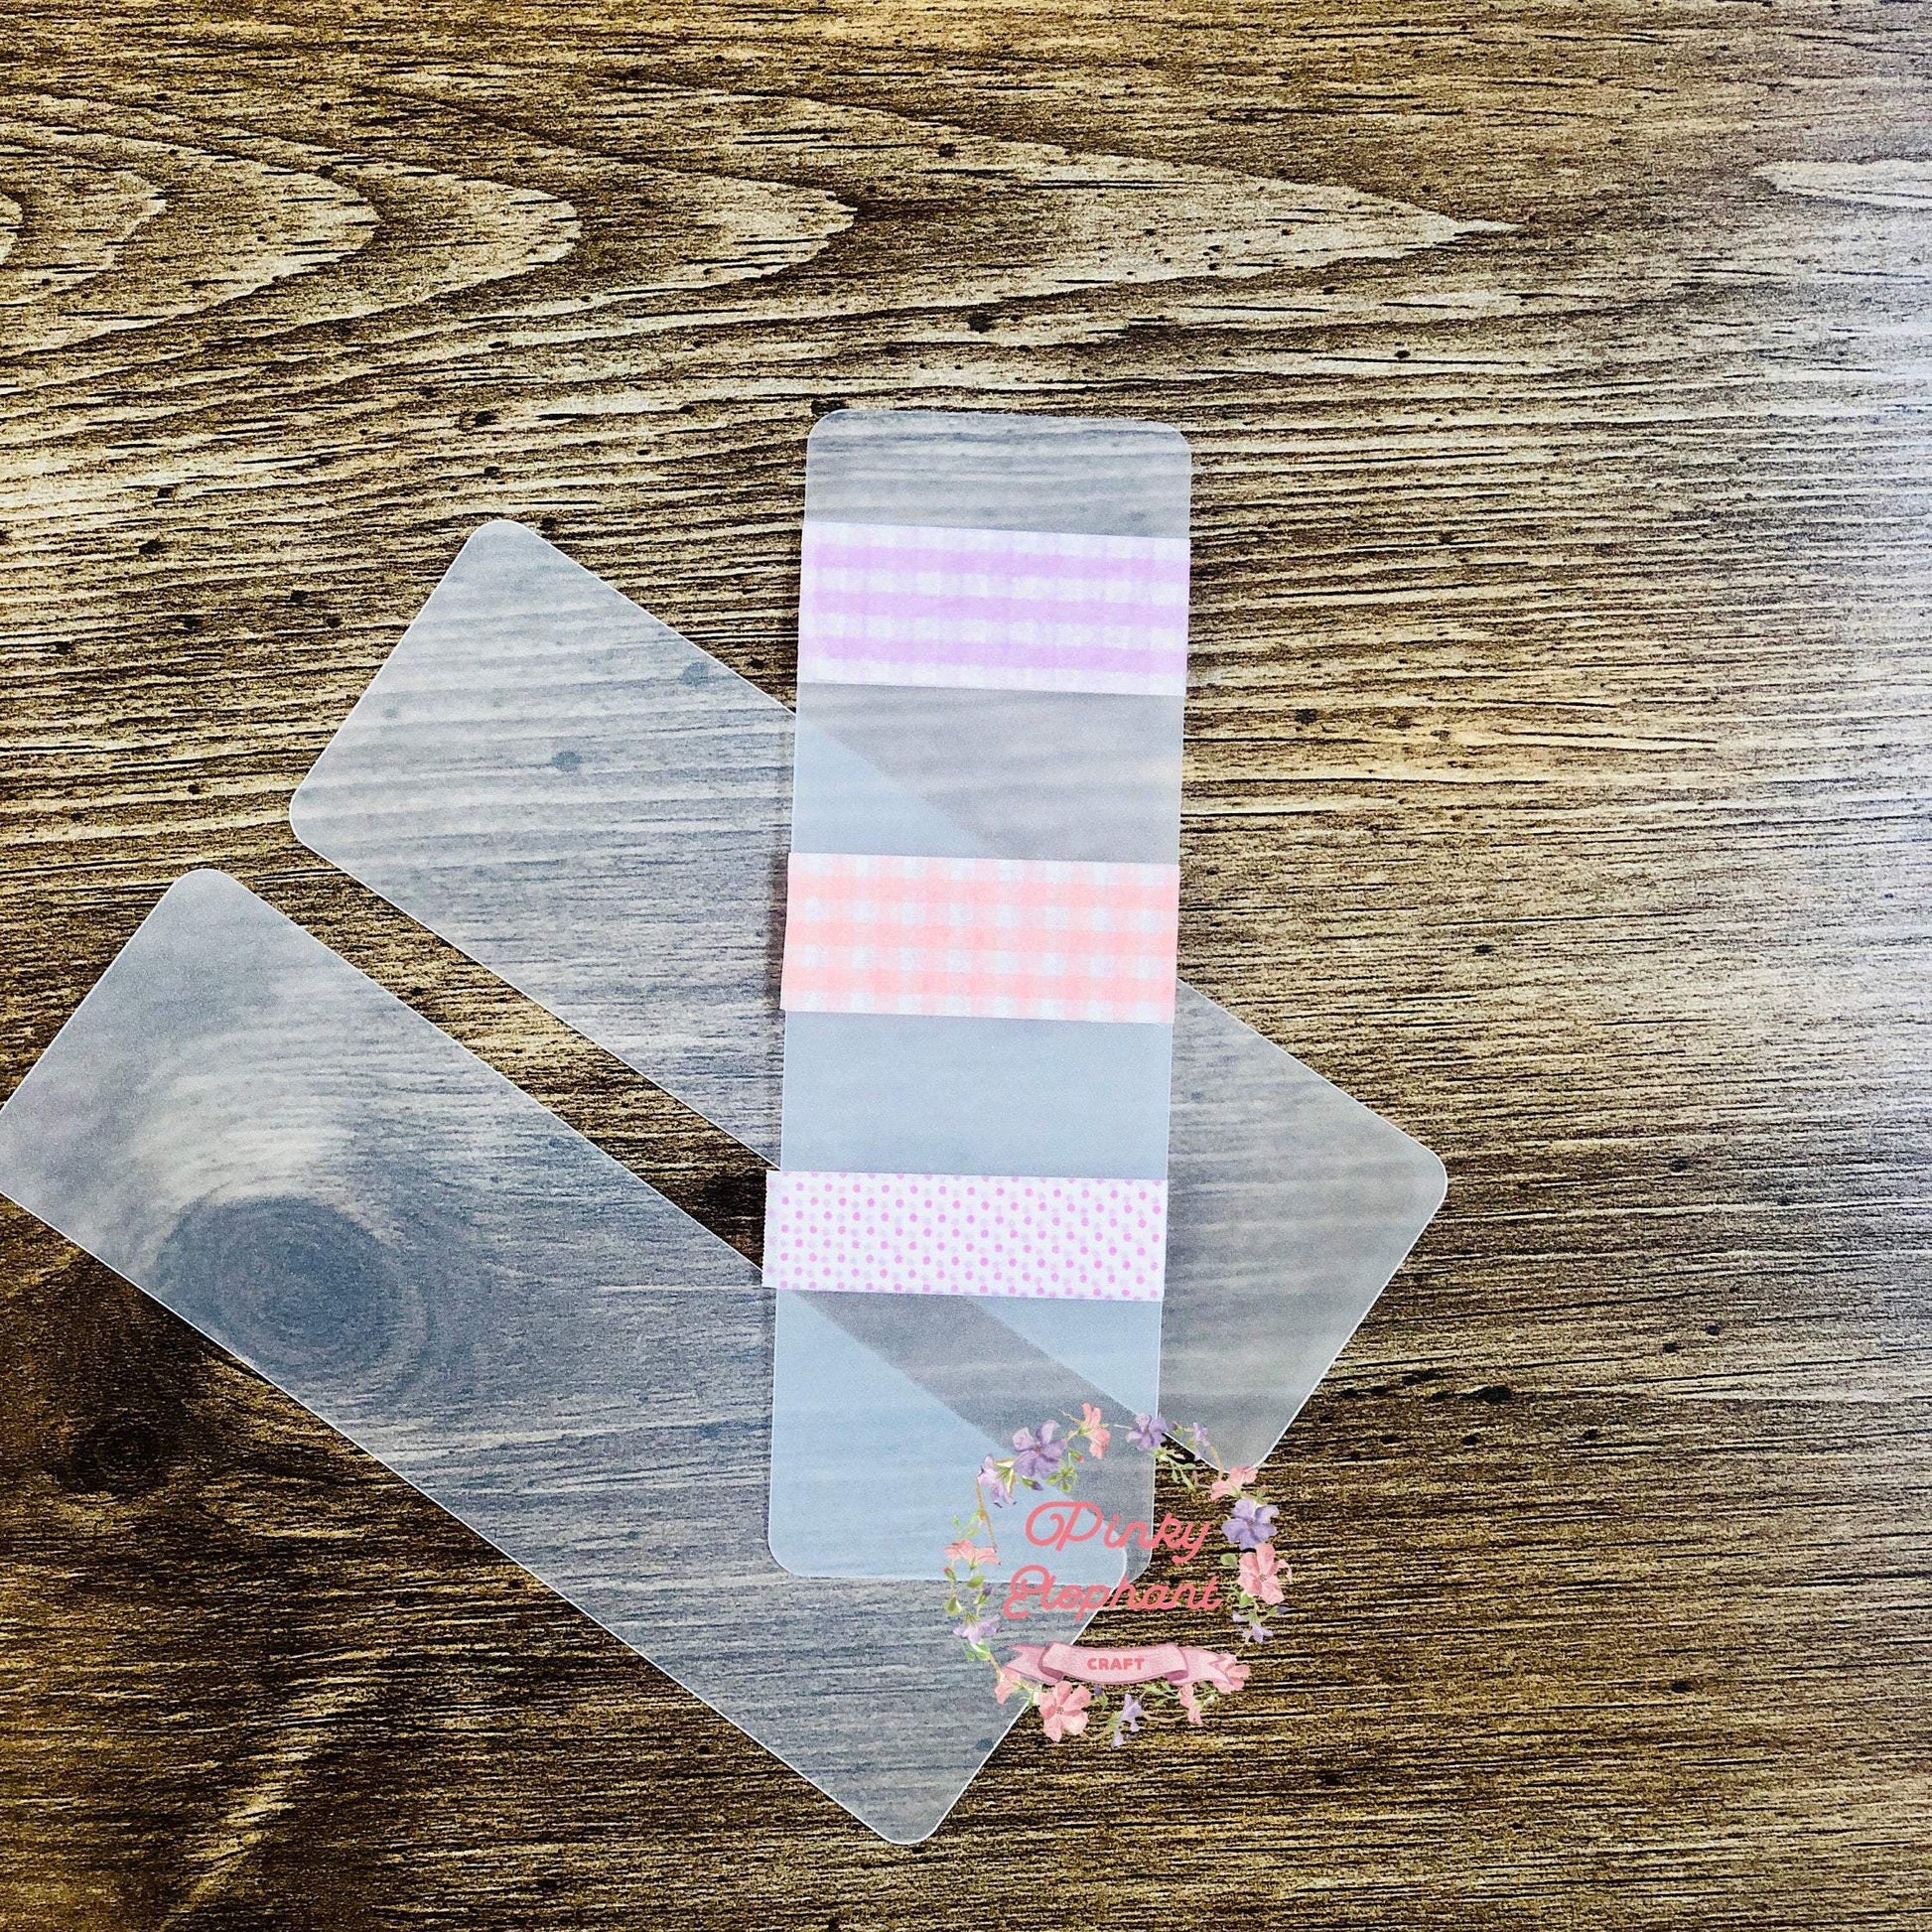 Top view of two clear washi tape cards and one sample card with three tapes on in a wooden background.